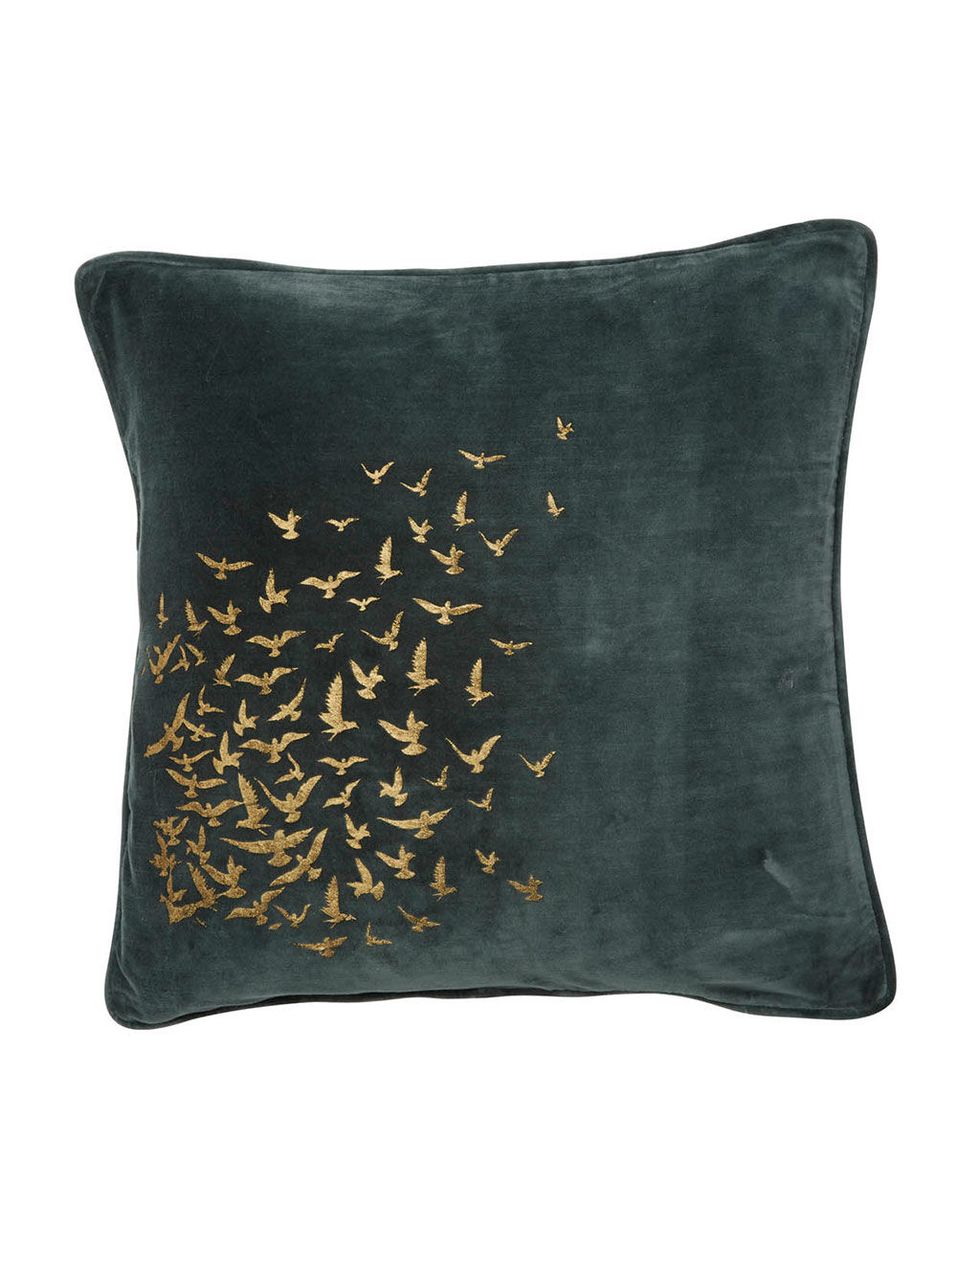 Textile, Cushion, Pillow, Throw pillow, Black, Grey, Home accessories, Costume accessory, Teal, Linens, 